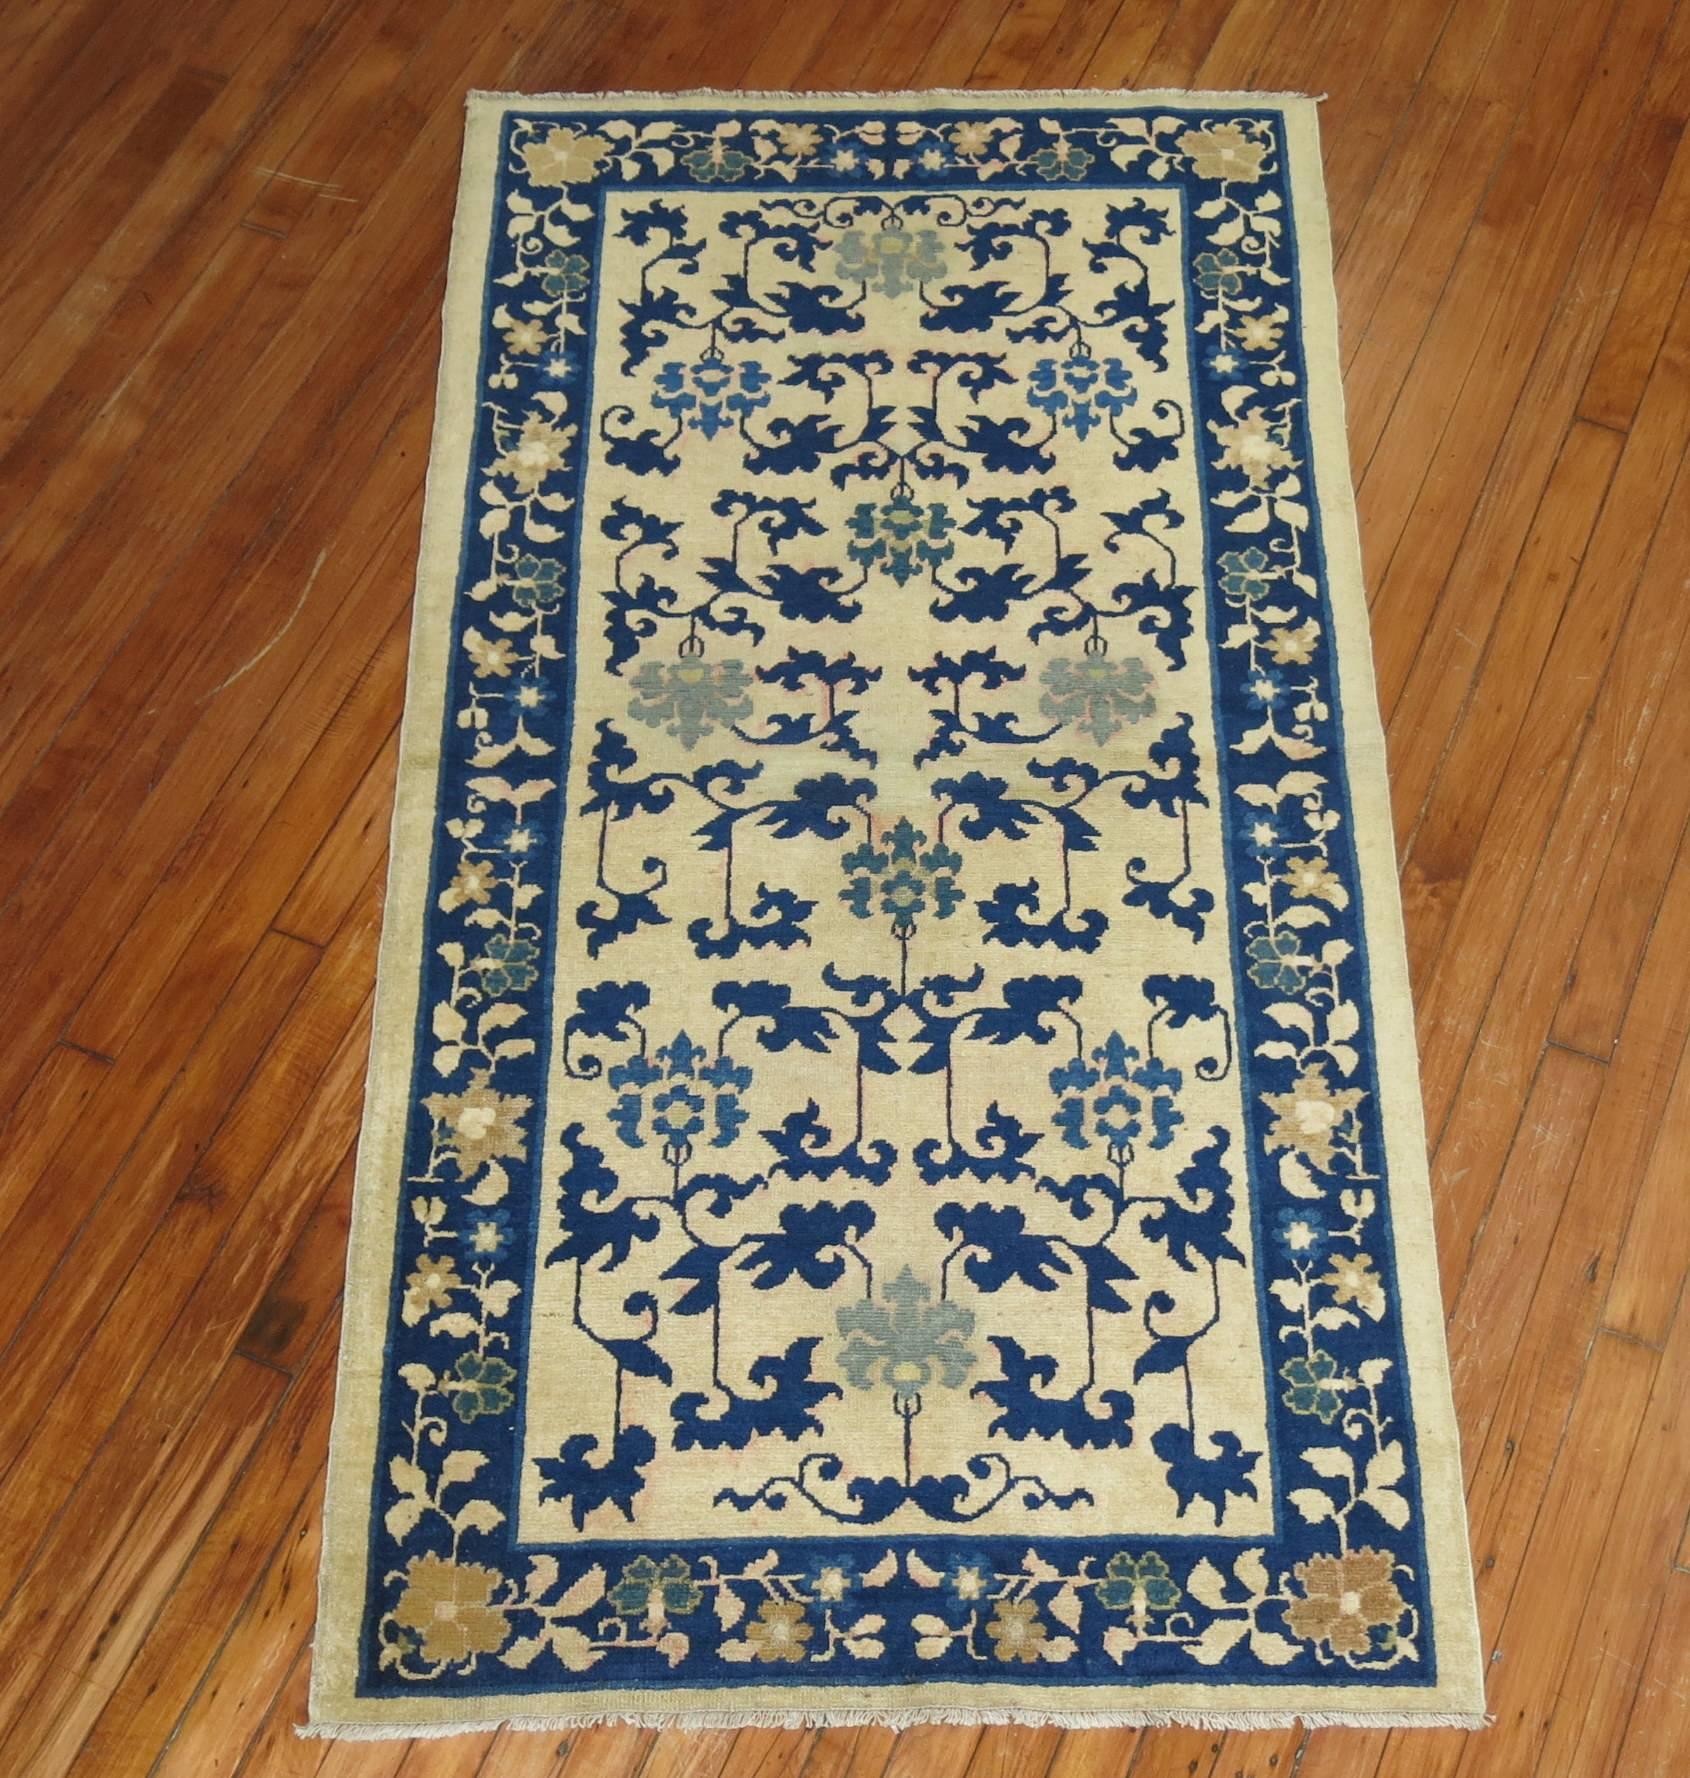 An early 20th century Chinese peking throw rug. Cream field with blue accents. 

3' x 5'10''